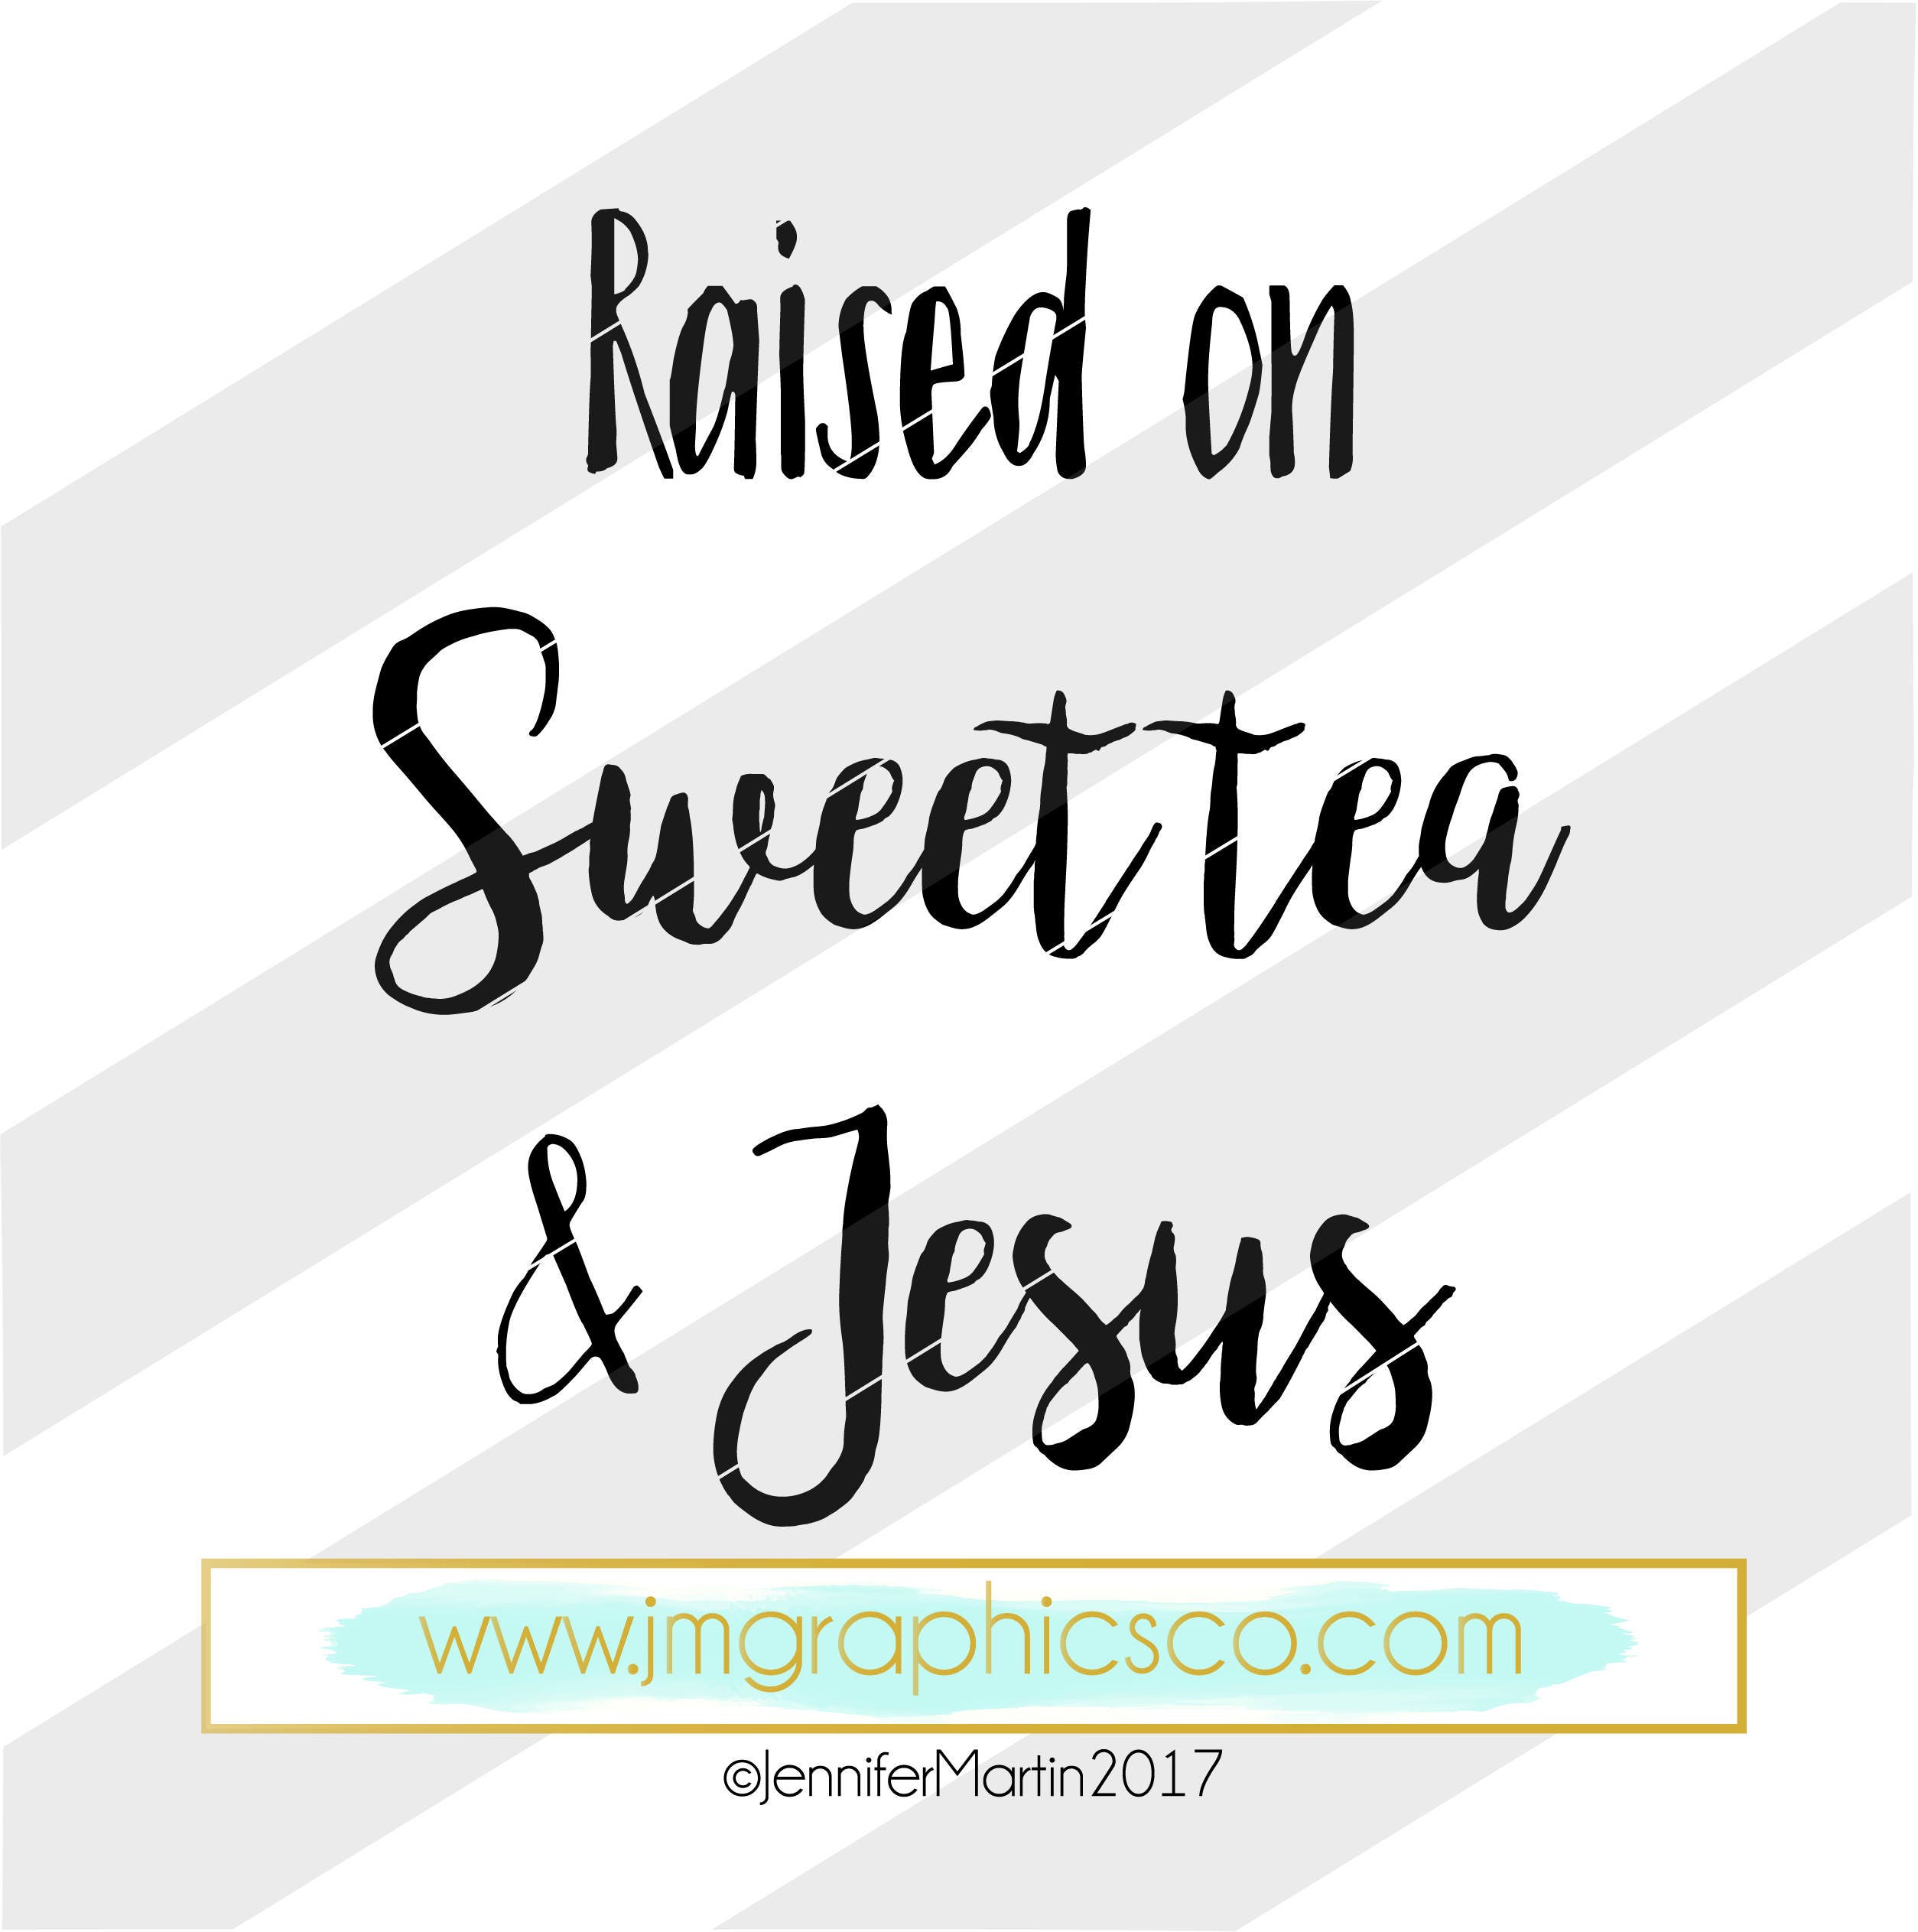 Download Raised on sweet tea and Jesus svg eps dxf png cricut or